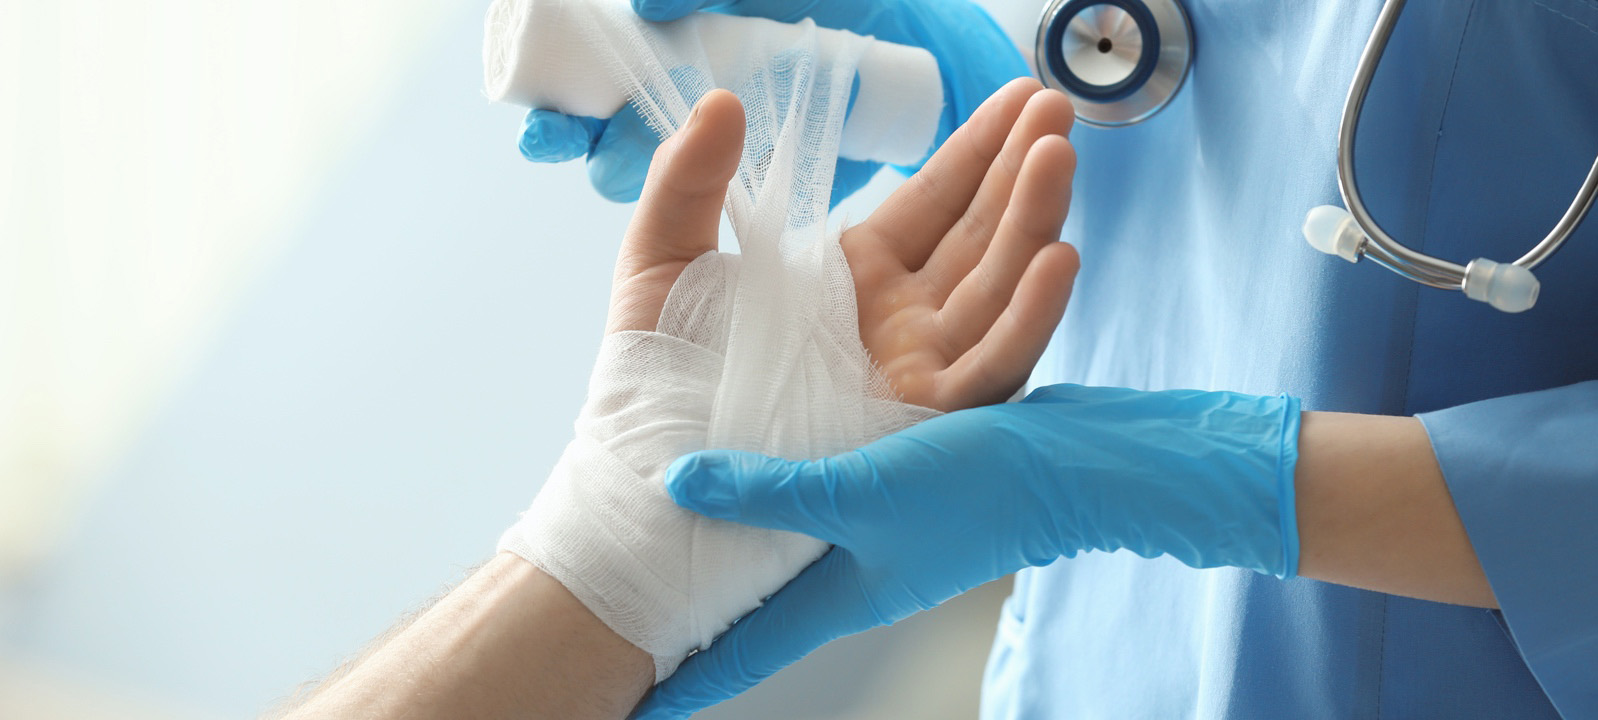 A medical professional wrapping a bandage around a patient's hand